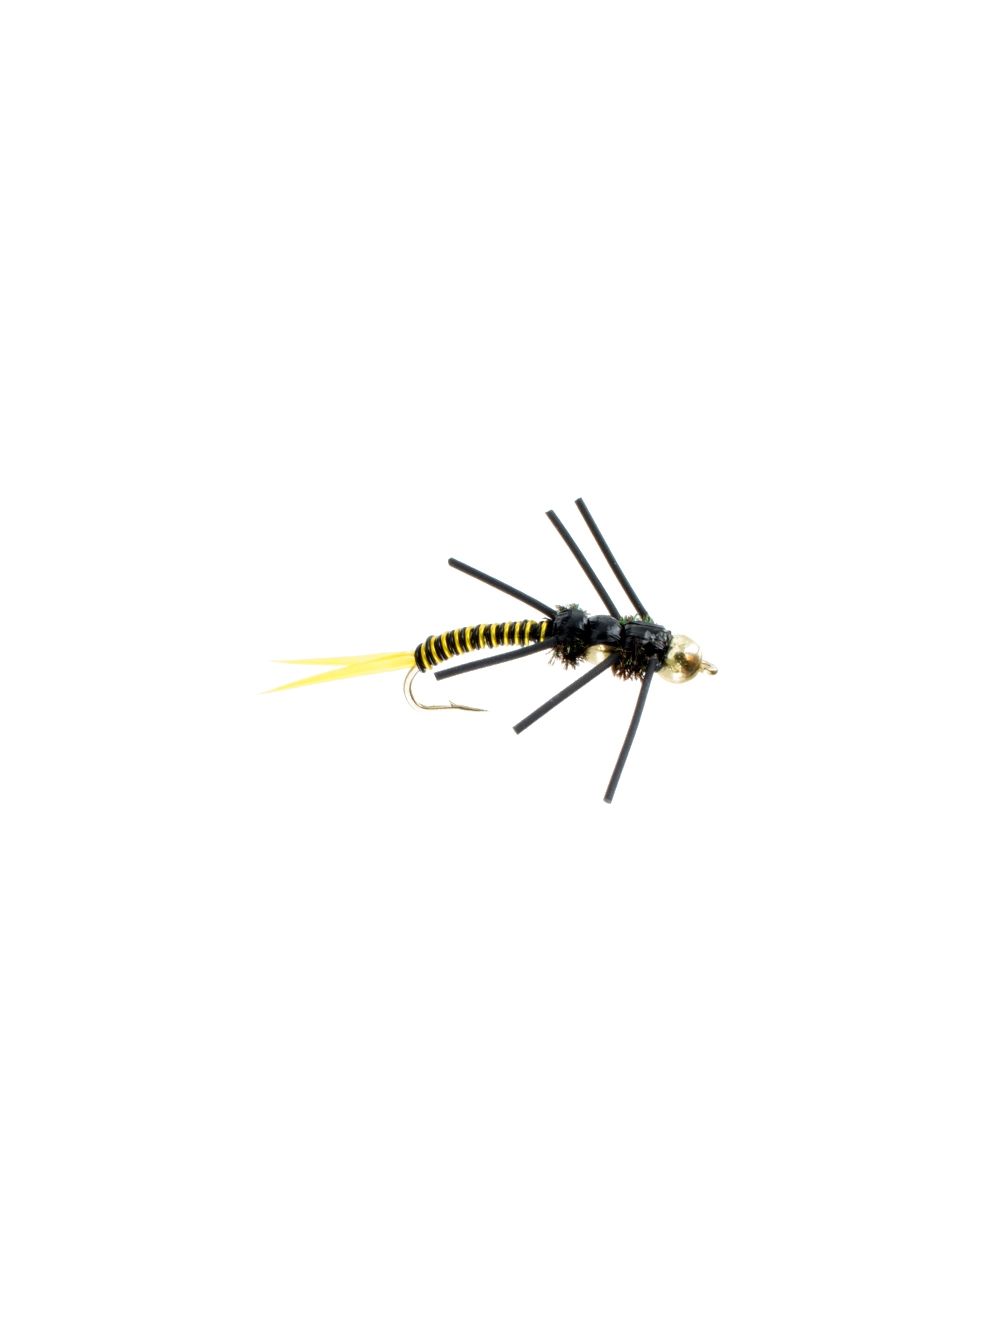 Double Tungsten Bead Black Stonefly Nymph Fly